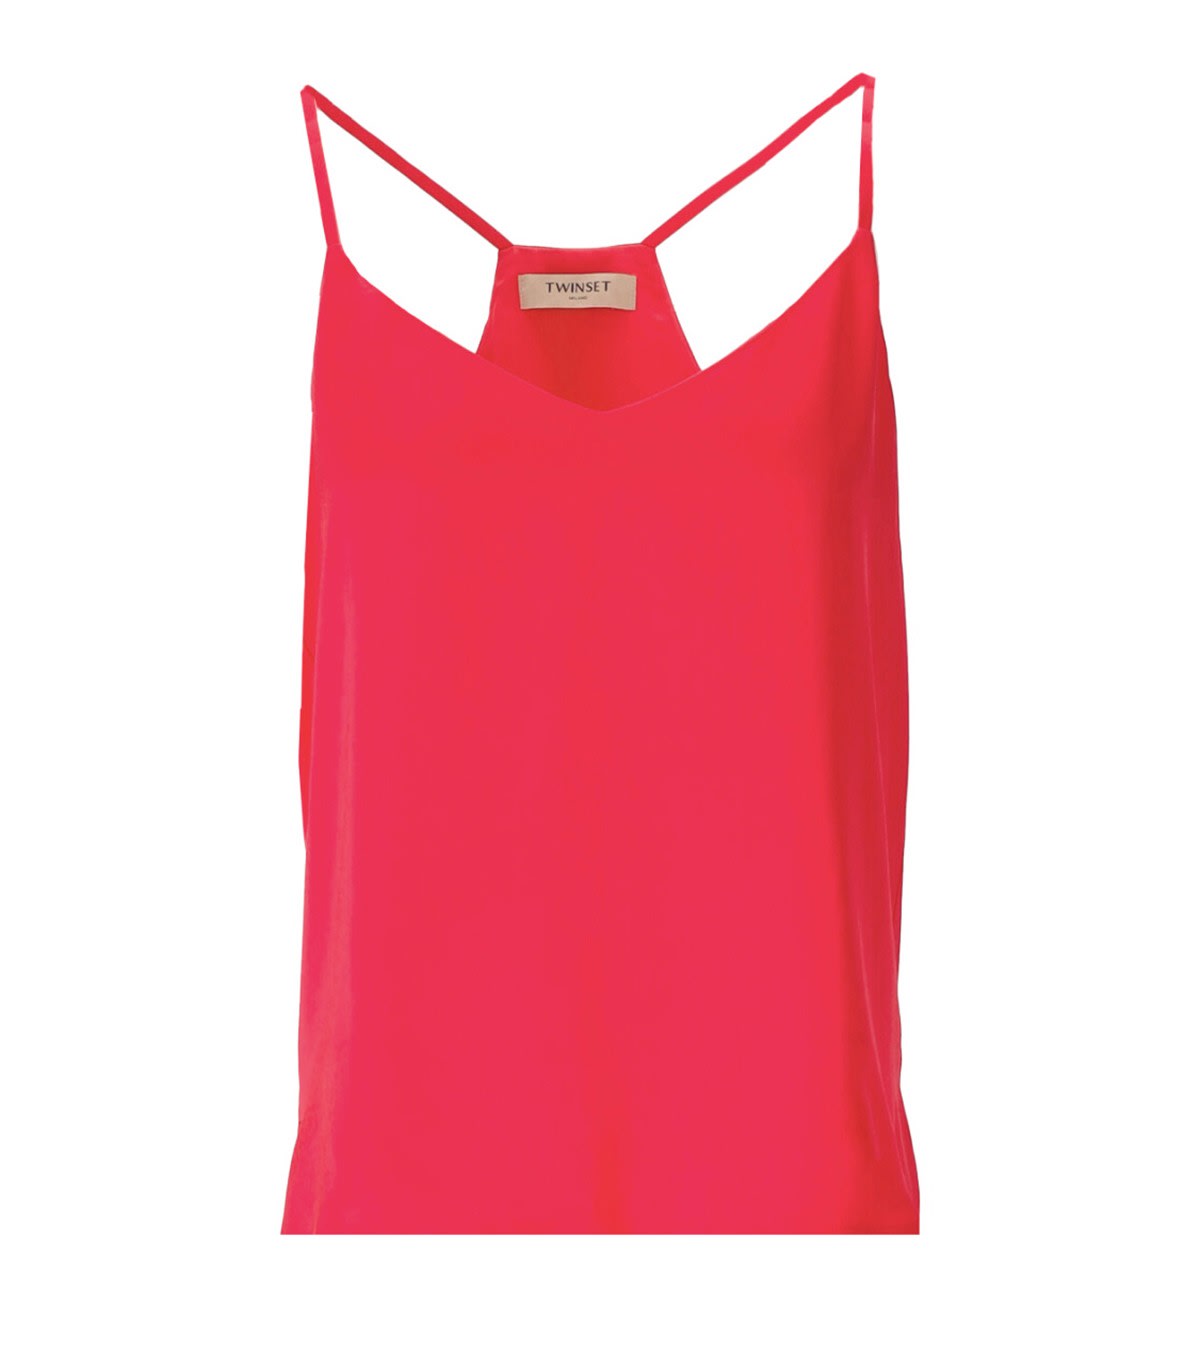 TWINSET TWINSET CORAL SATIN TOP